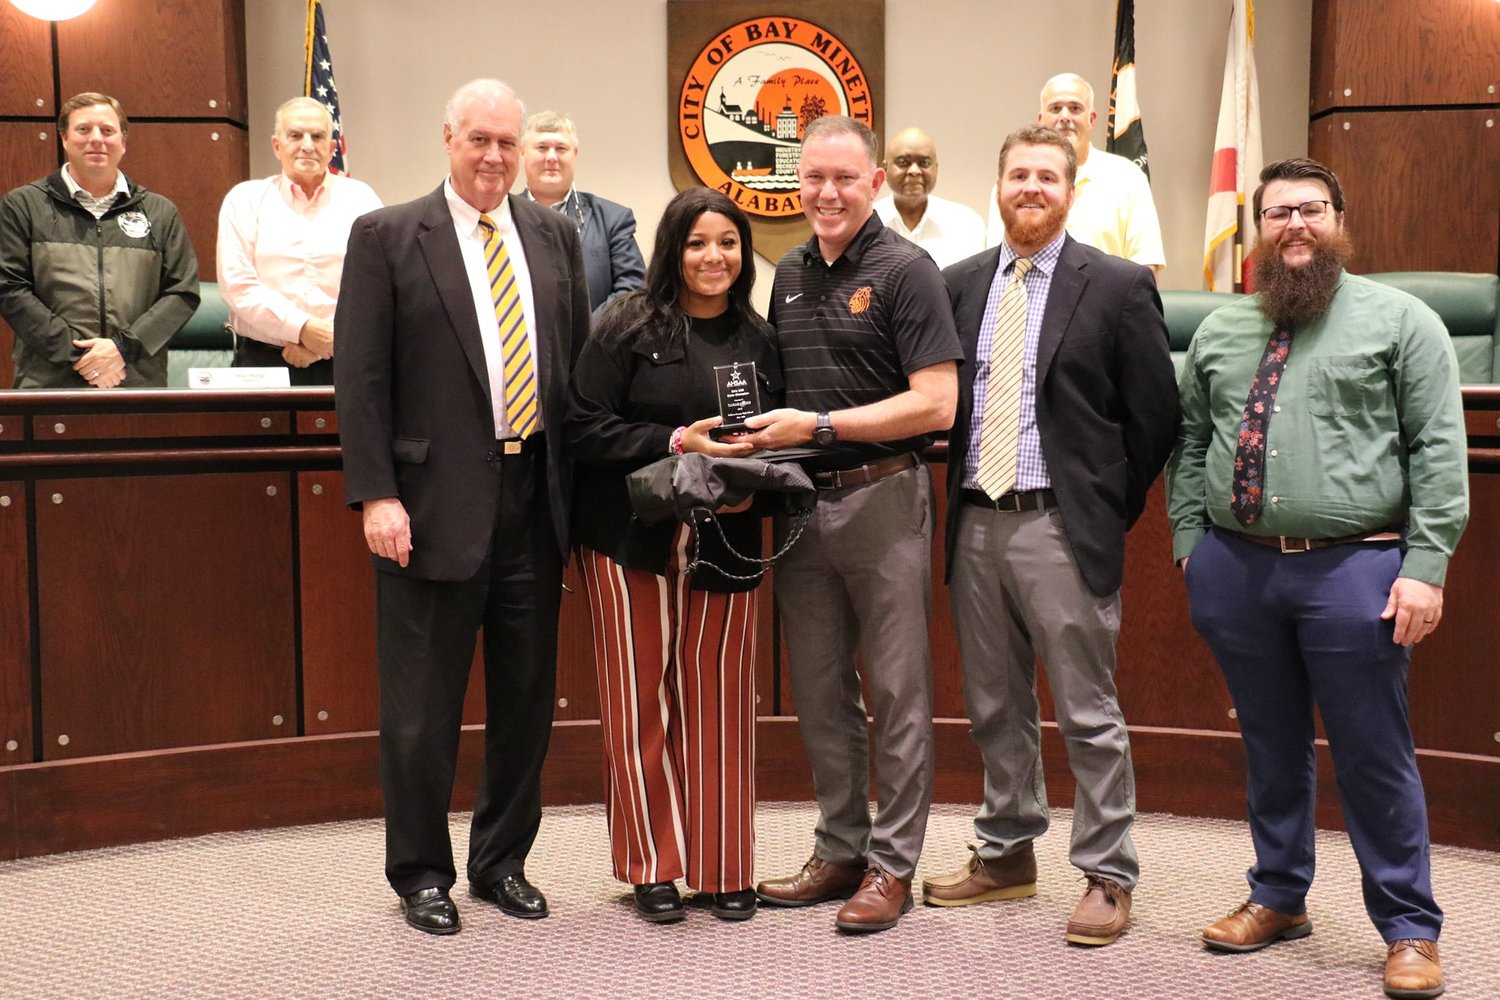 Tamara Reed was honored during a Bay Minette City Council meeting for her many accomplishments this season. Mayor Bob Wills presented her with a special certificate and other gifts, and Baldwin County High School Principal Craig Smith presented her with a state championship award.